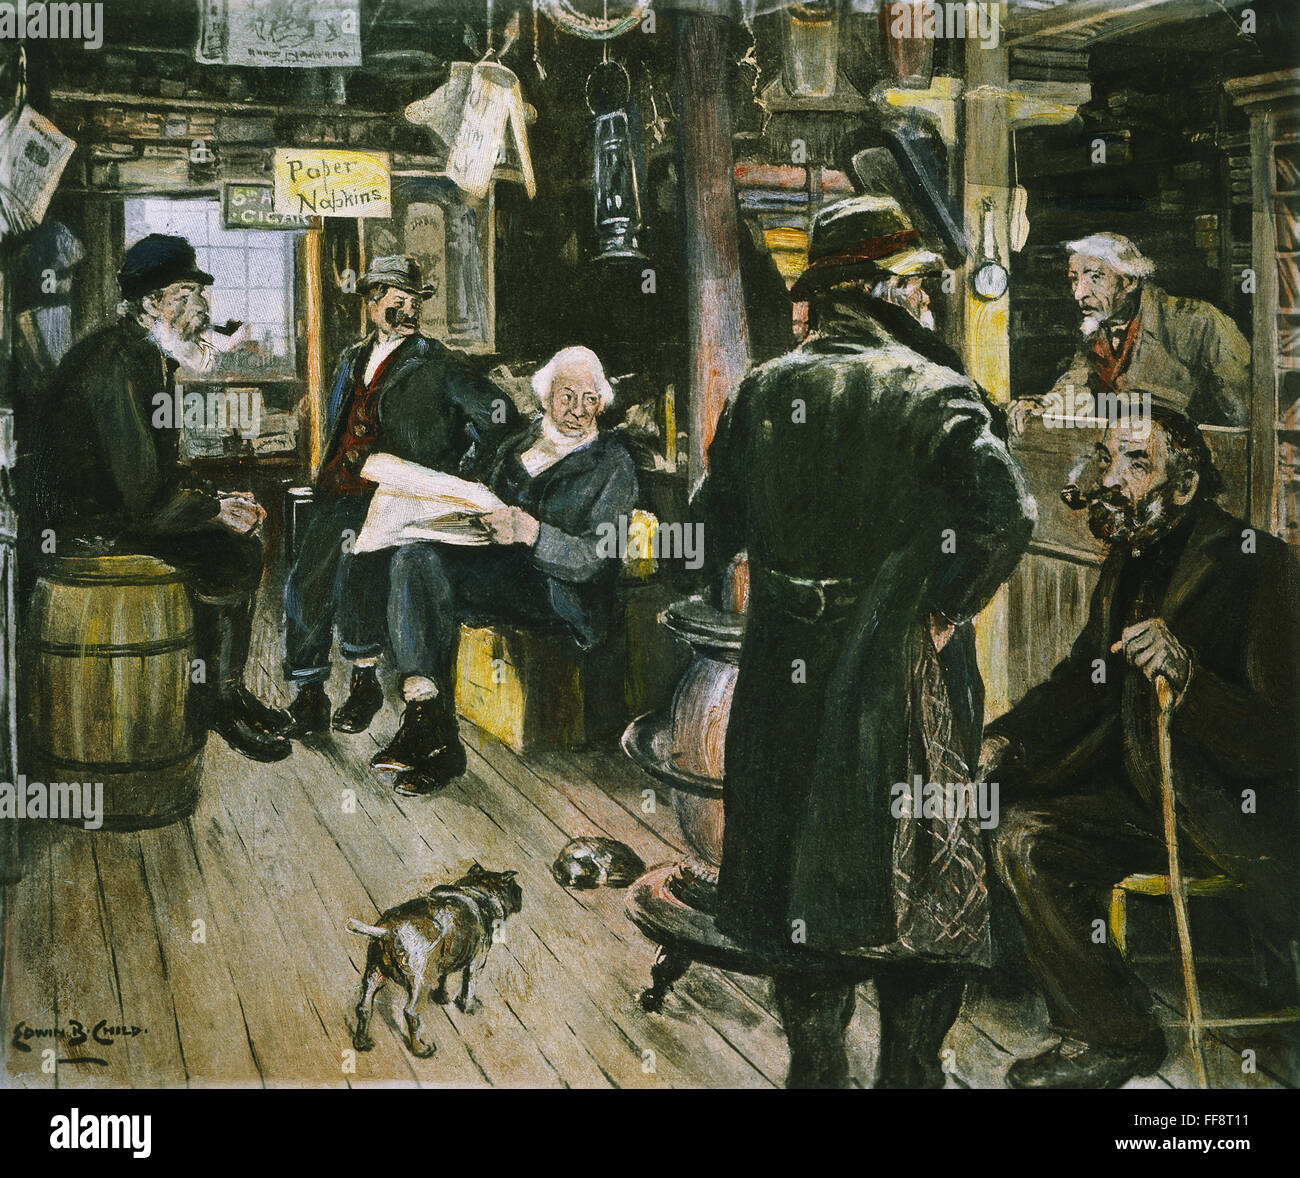 COUNTRY STORE. /nA 19th century American country store interior. Illustration by Edwin B. Child (1868-1937). Stock Photo